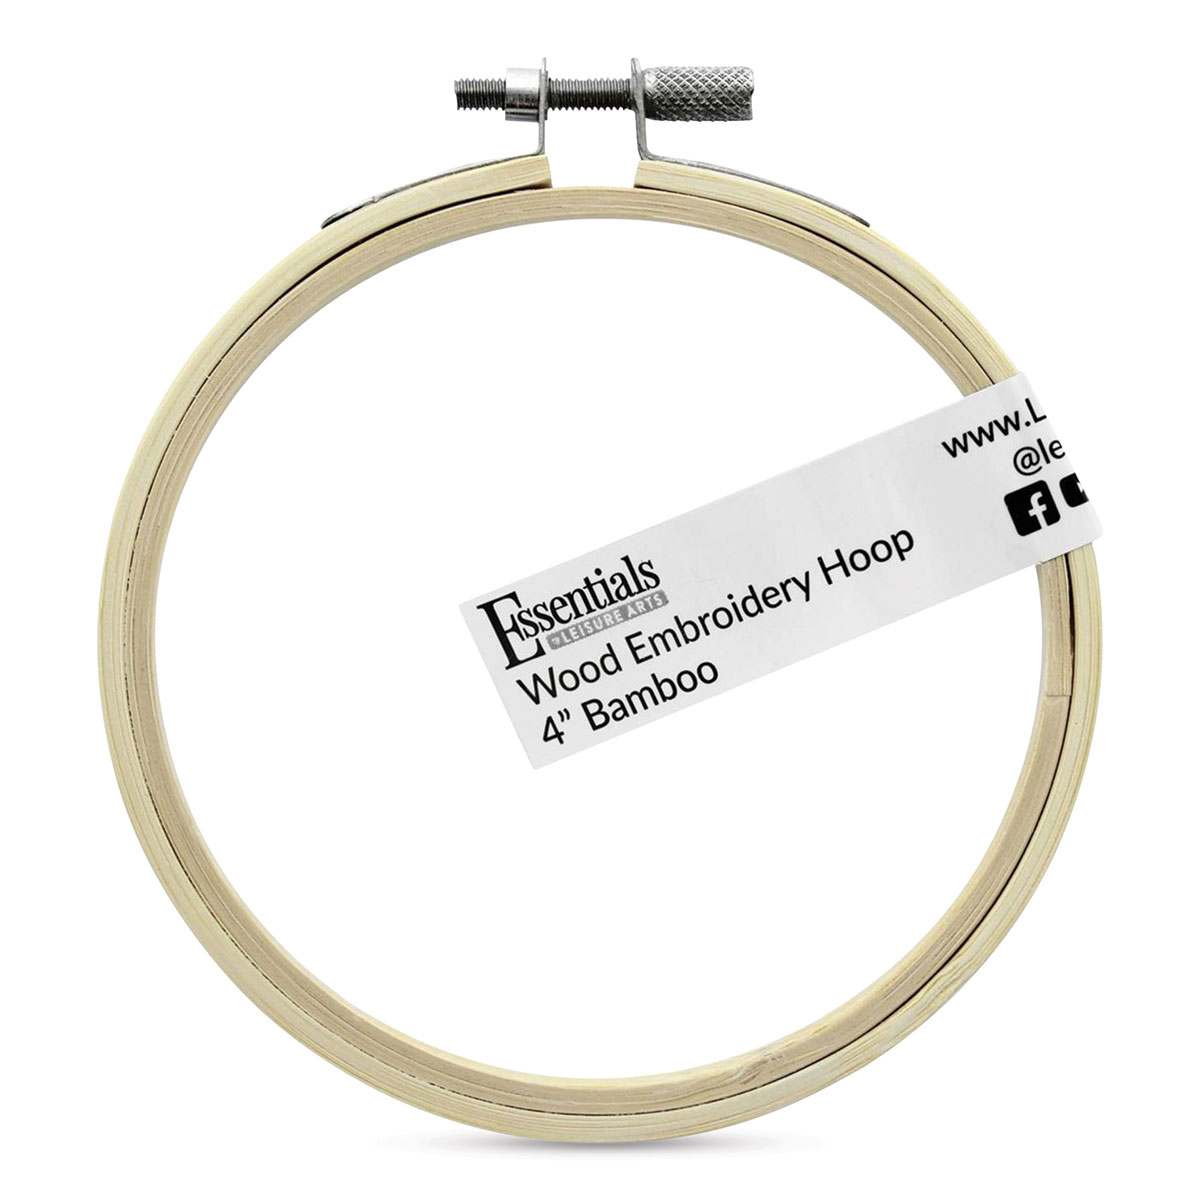 Essentials by Leisure Arts Wood Embroidery Hoops